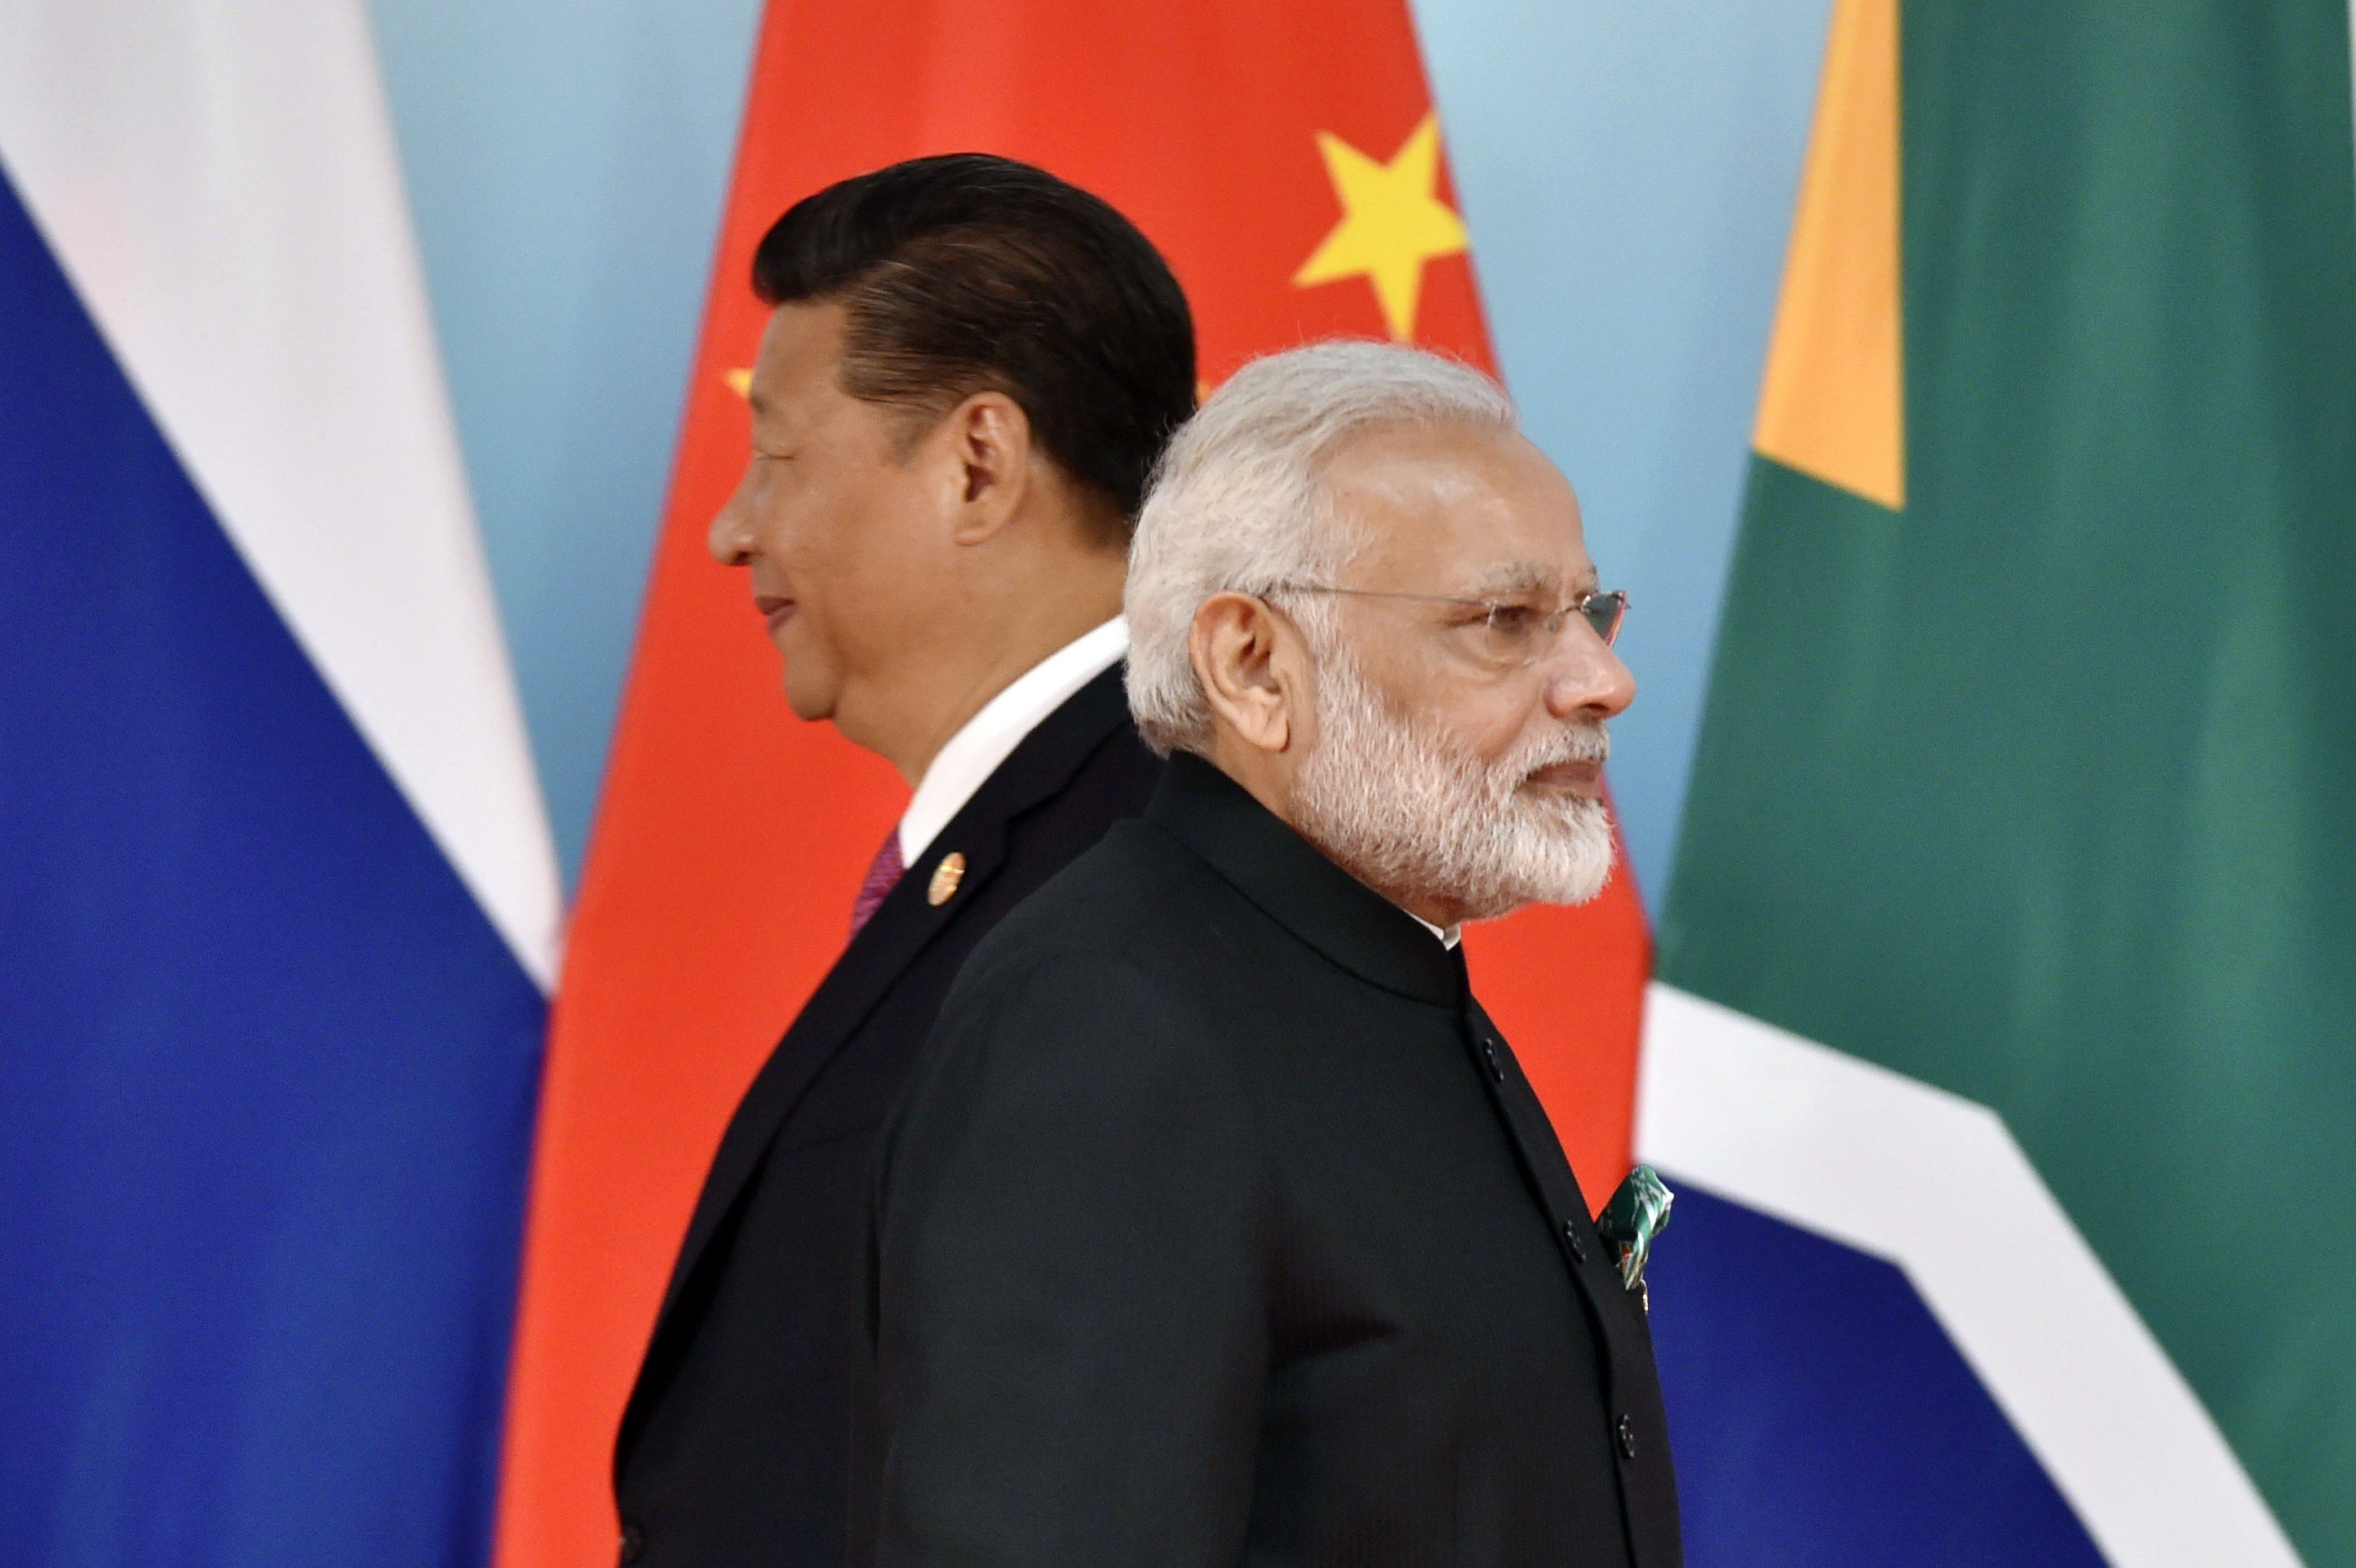 Chinese President Xi Jinping and Indian Prime Minister Narendra Modi at a summit in Xiamen in 2017. Photo: AFP